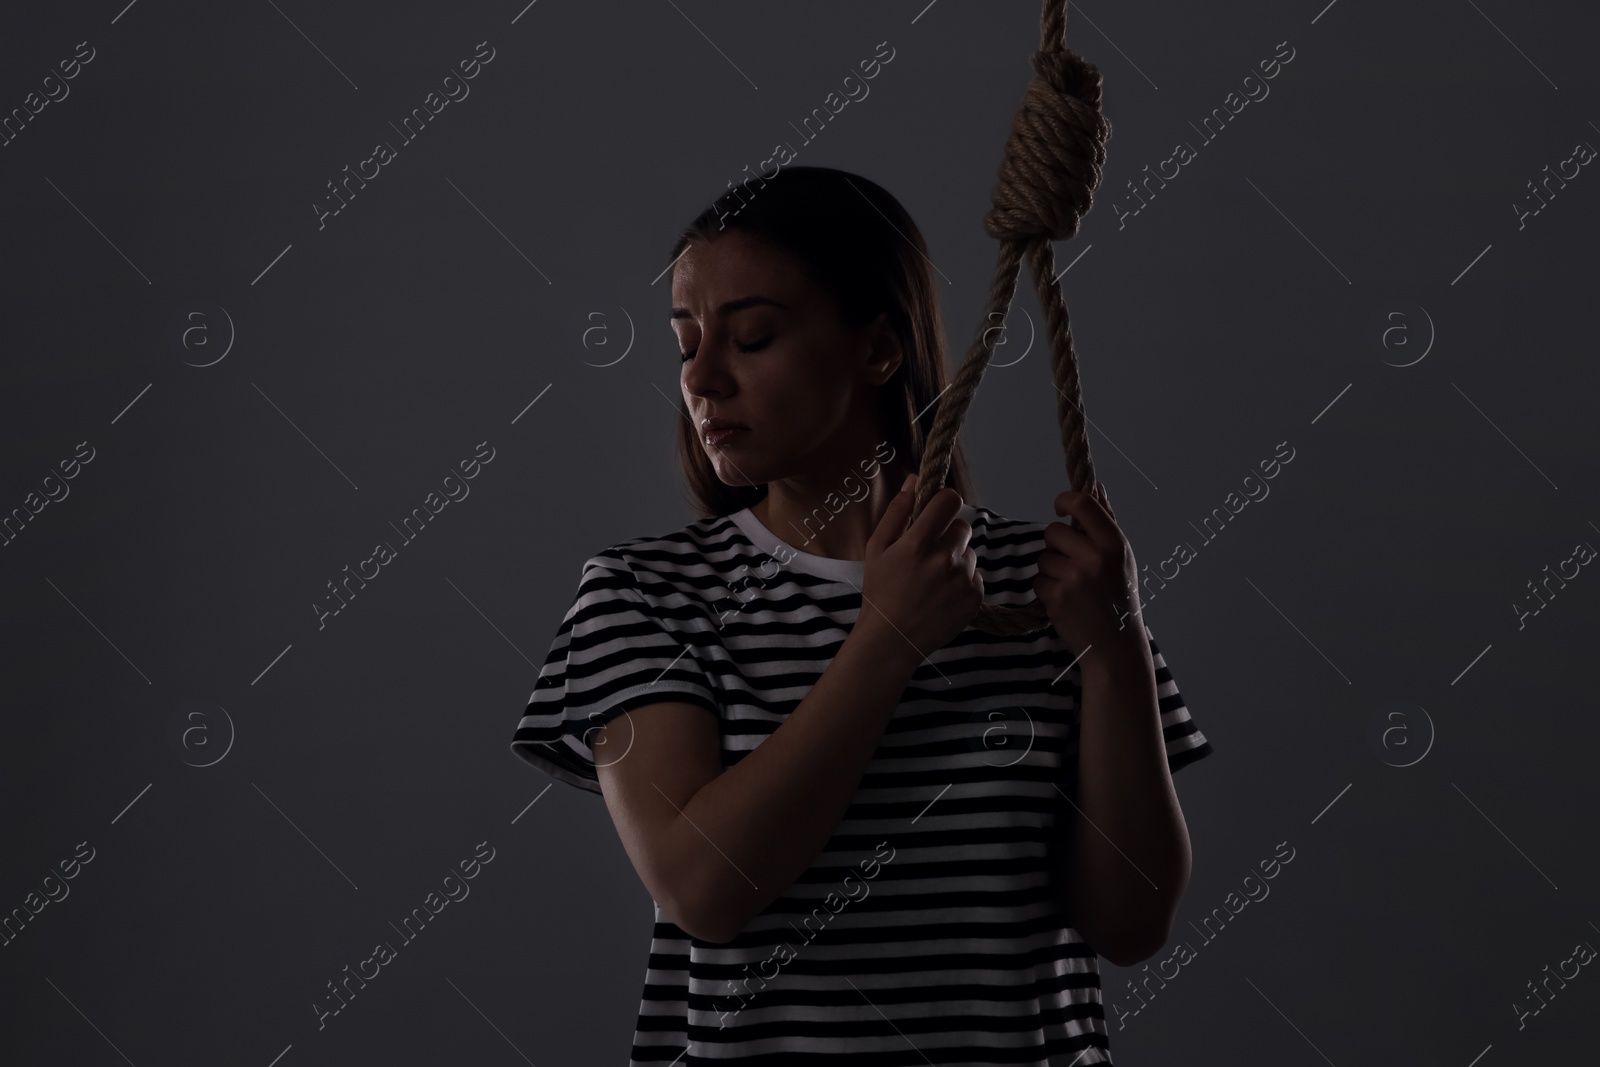 Photo of Depressed woman with rope noose on grey background